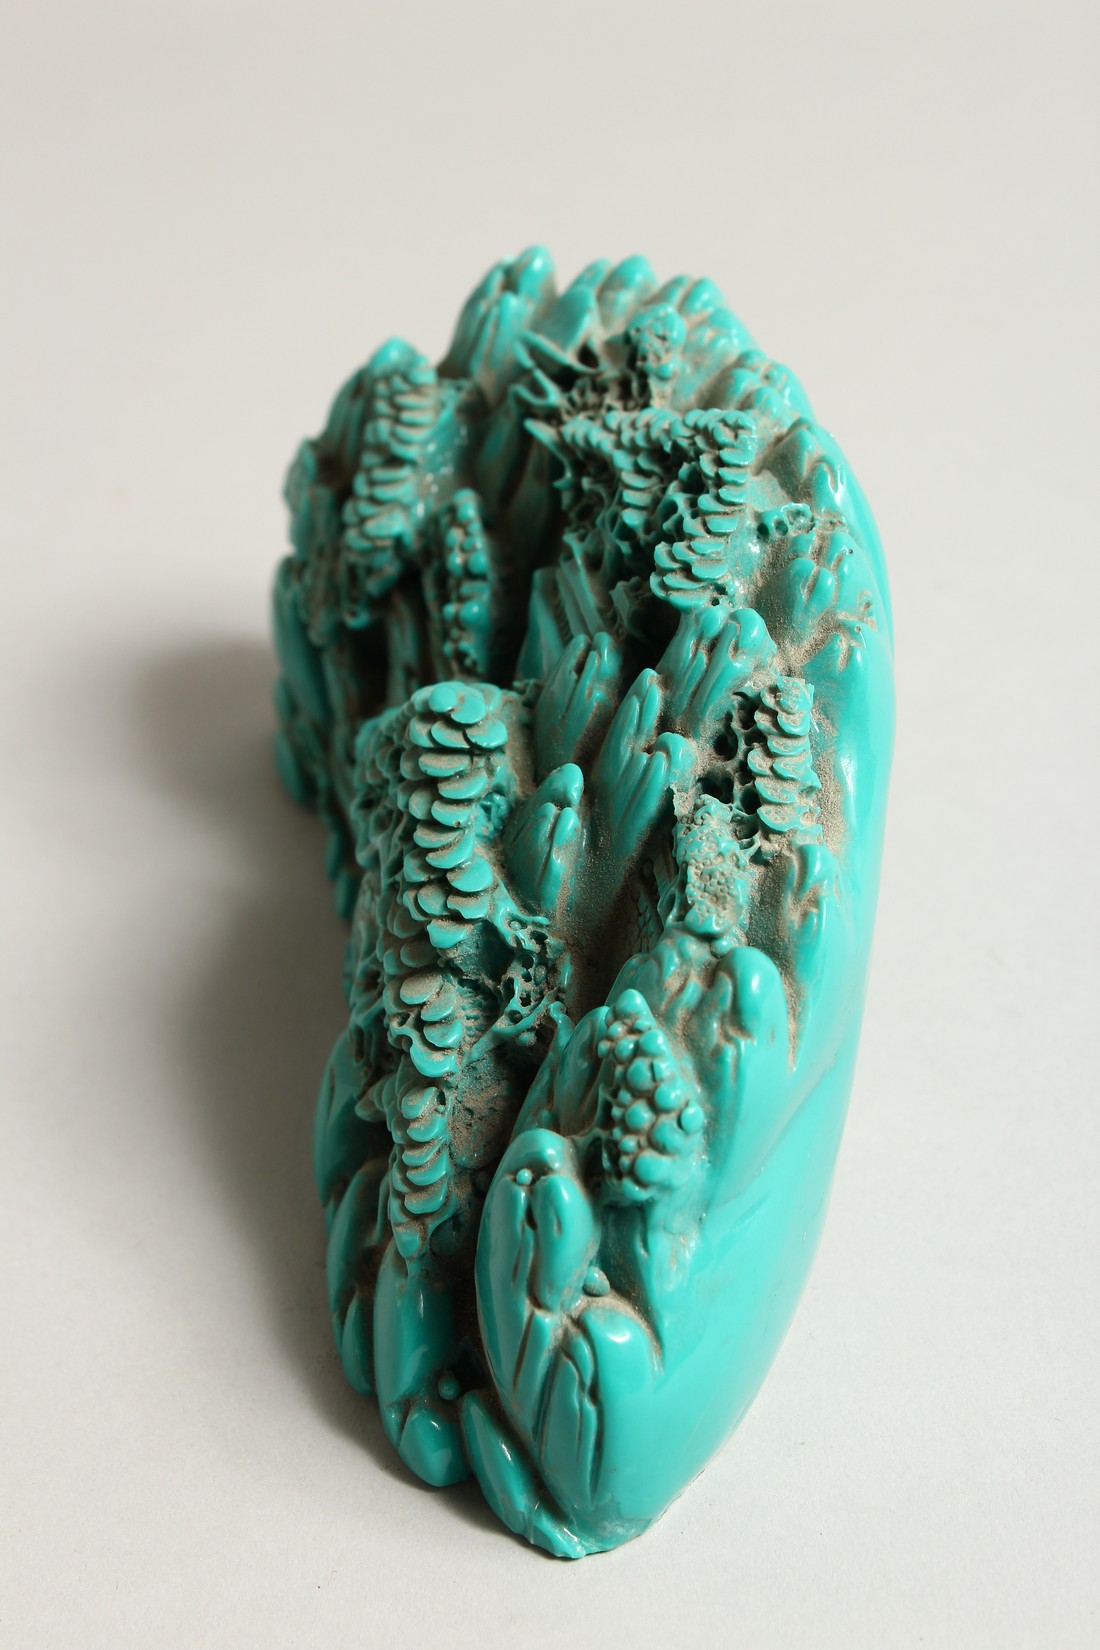 A CHINESE CARVED TURQUOISE BOULDER 9.5ins long. - Image 2 of 3